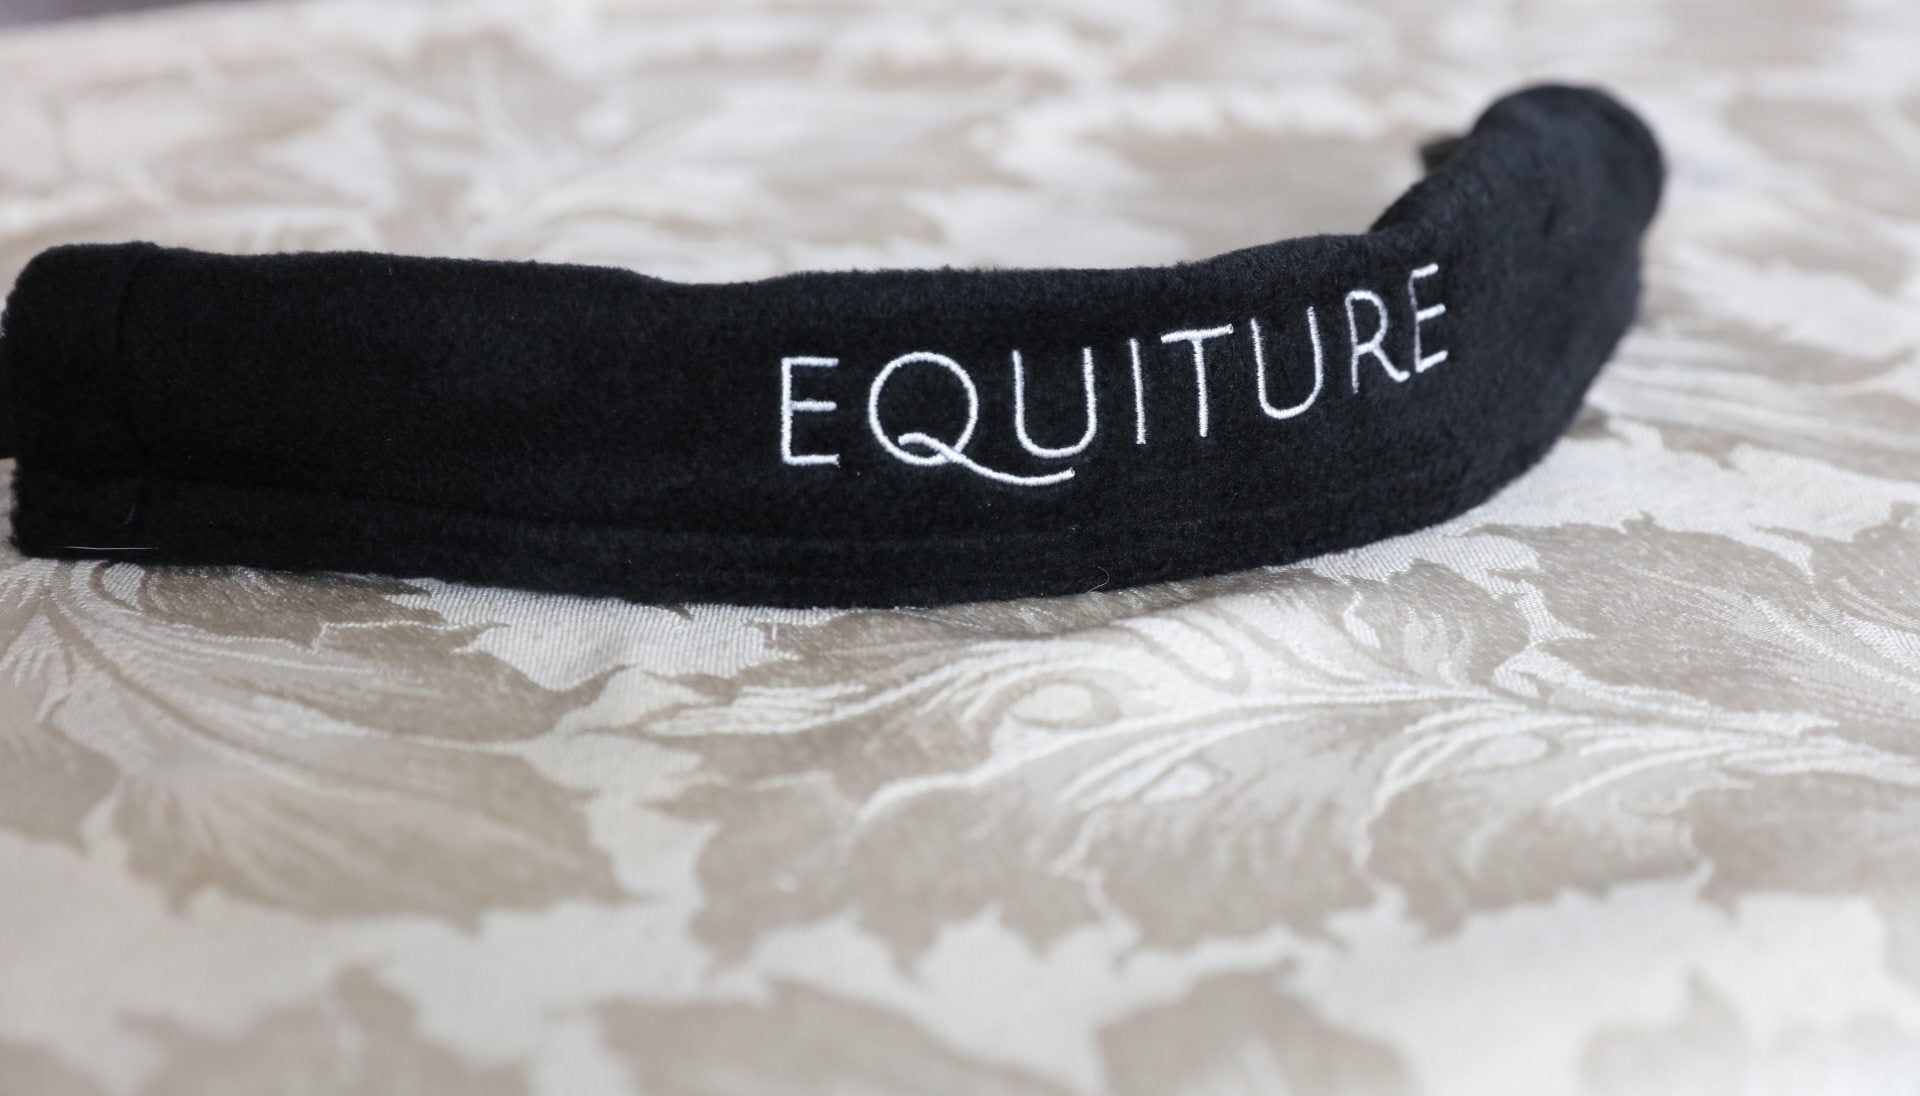 Equiture Emerald, clear and light colorado megabling curve browband